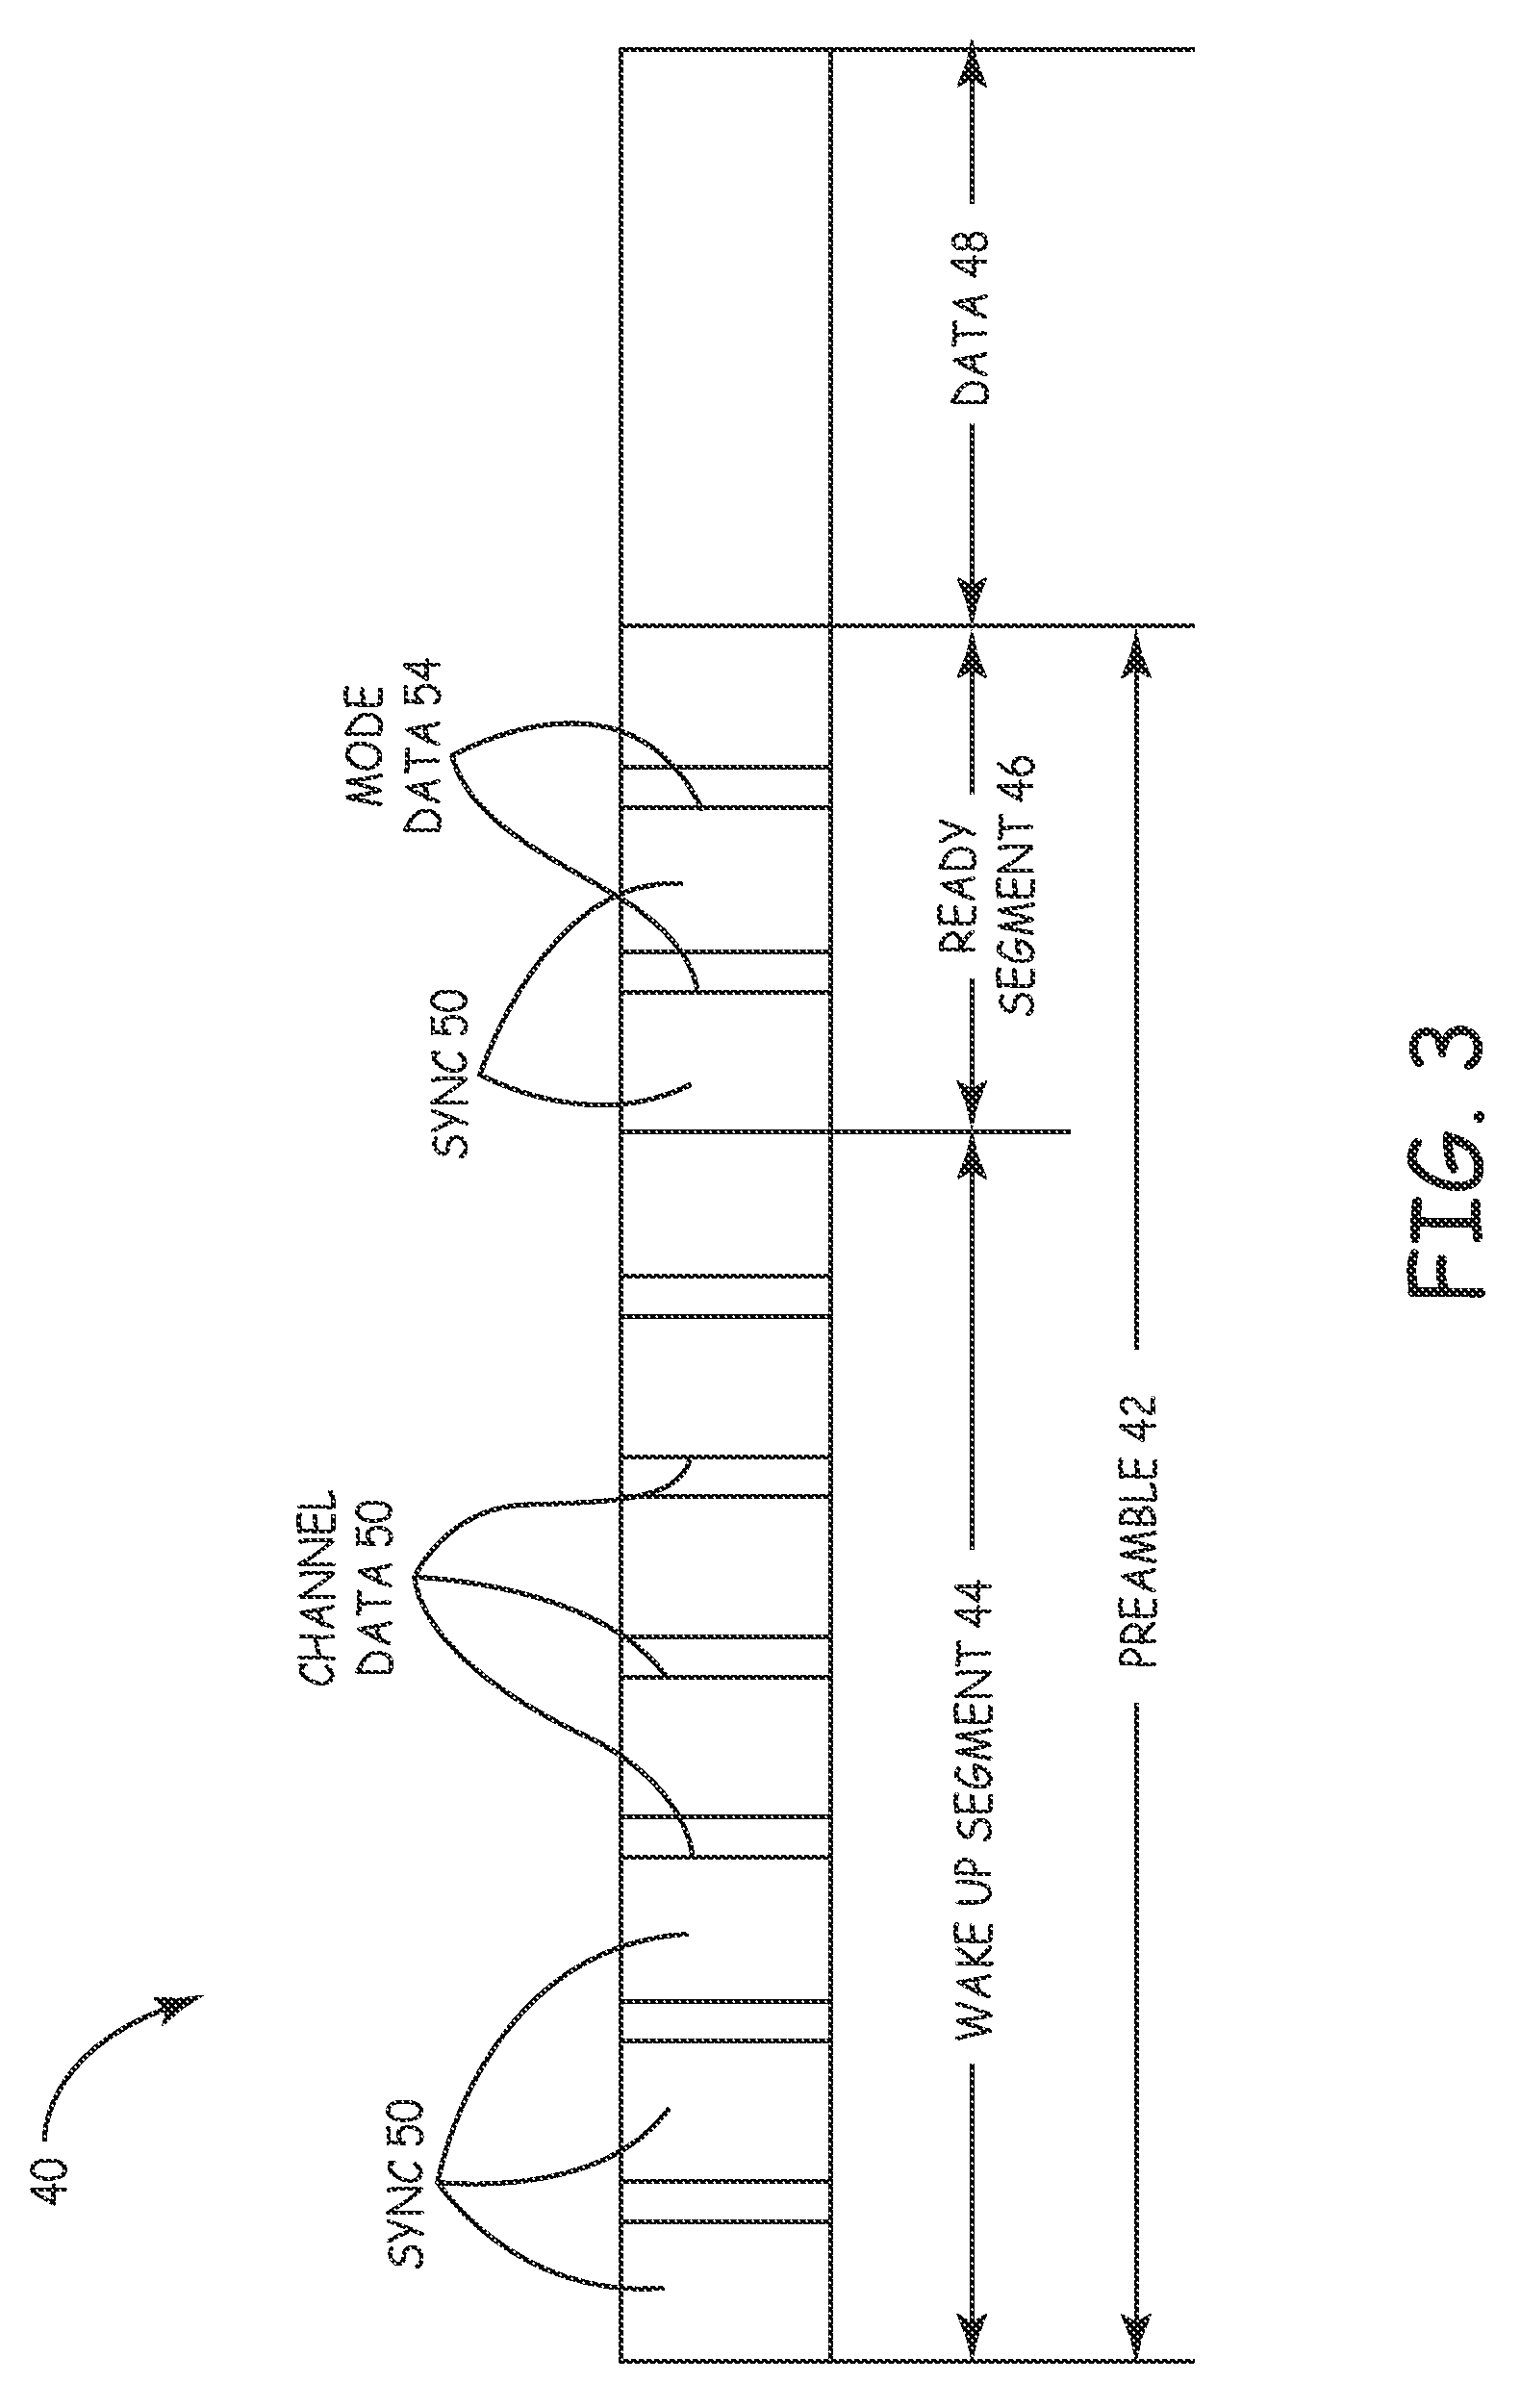 System and method for unscheduled wireless communication with a medical device